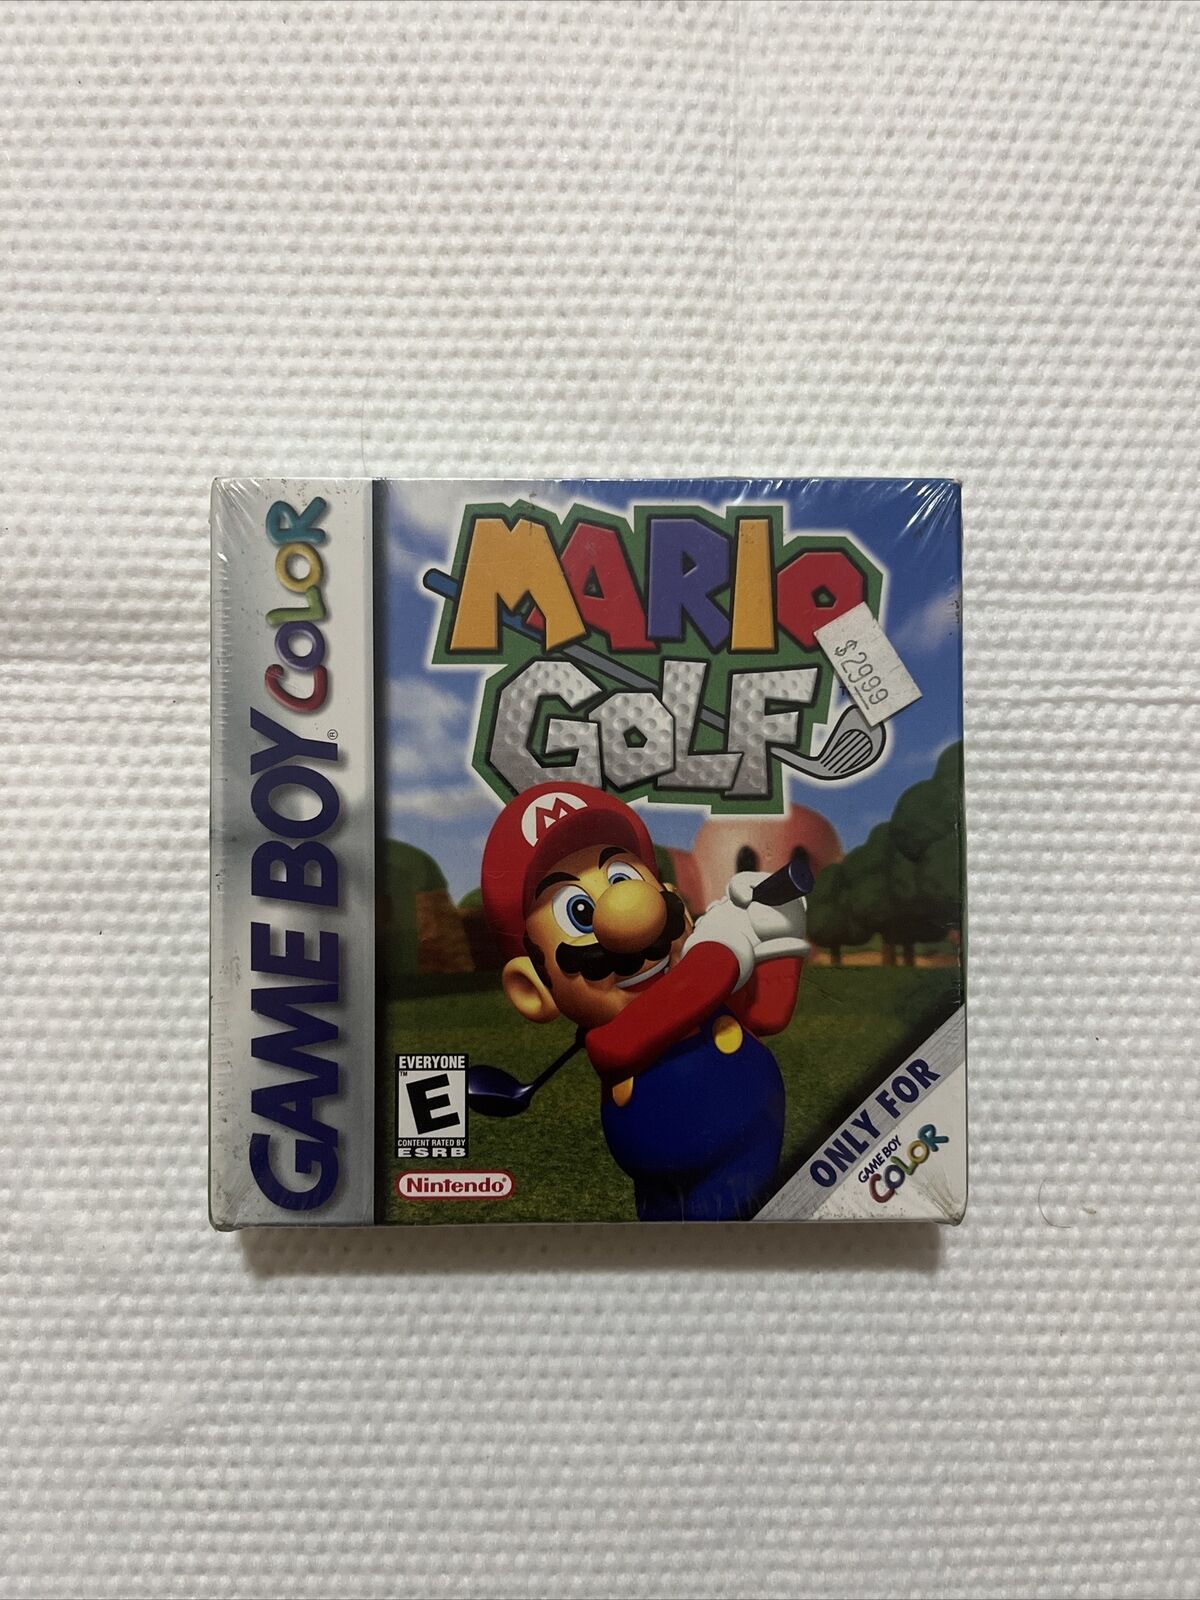 Does over-completing challenges earn extra XP in Mario Golf GBC?